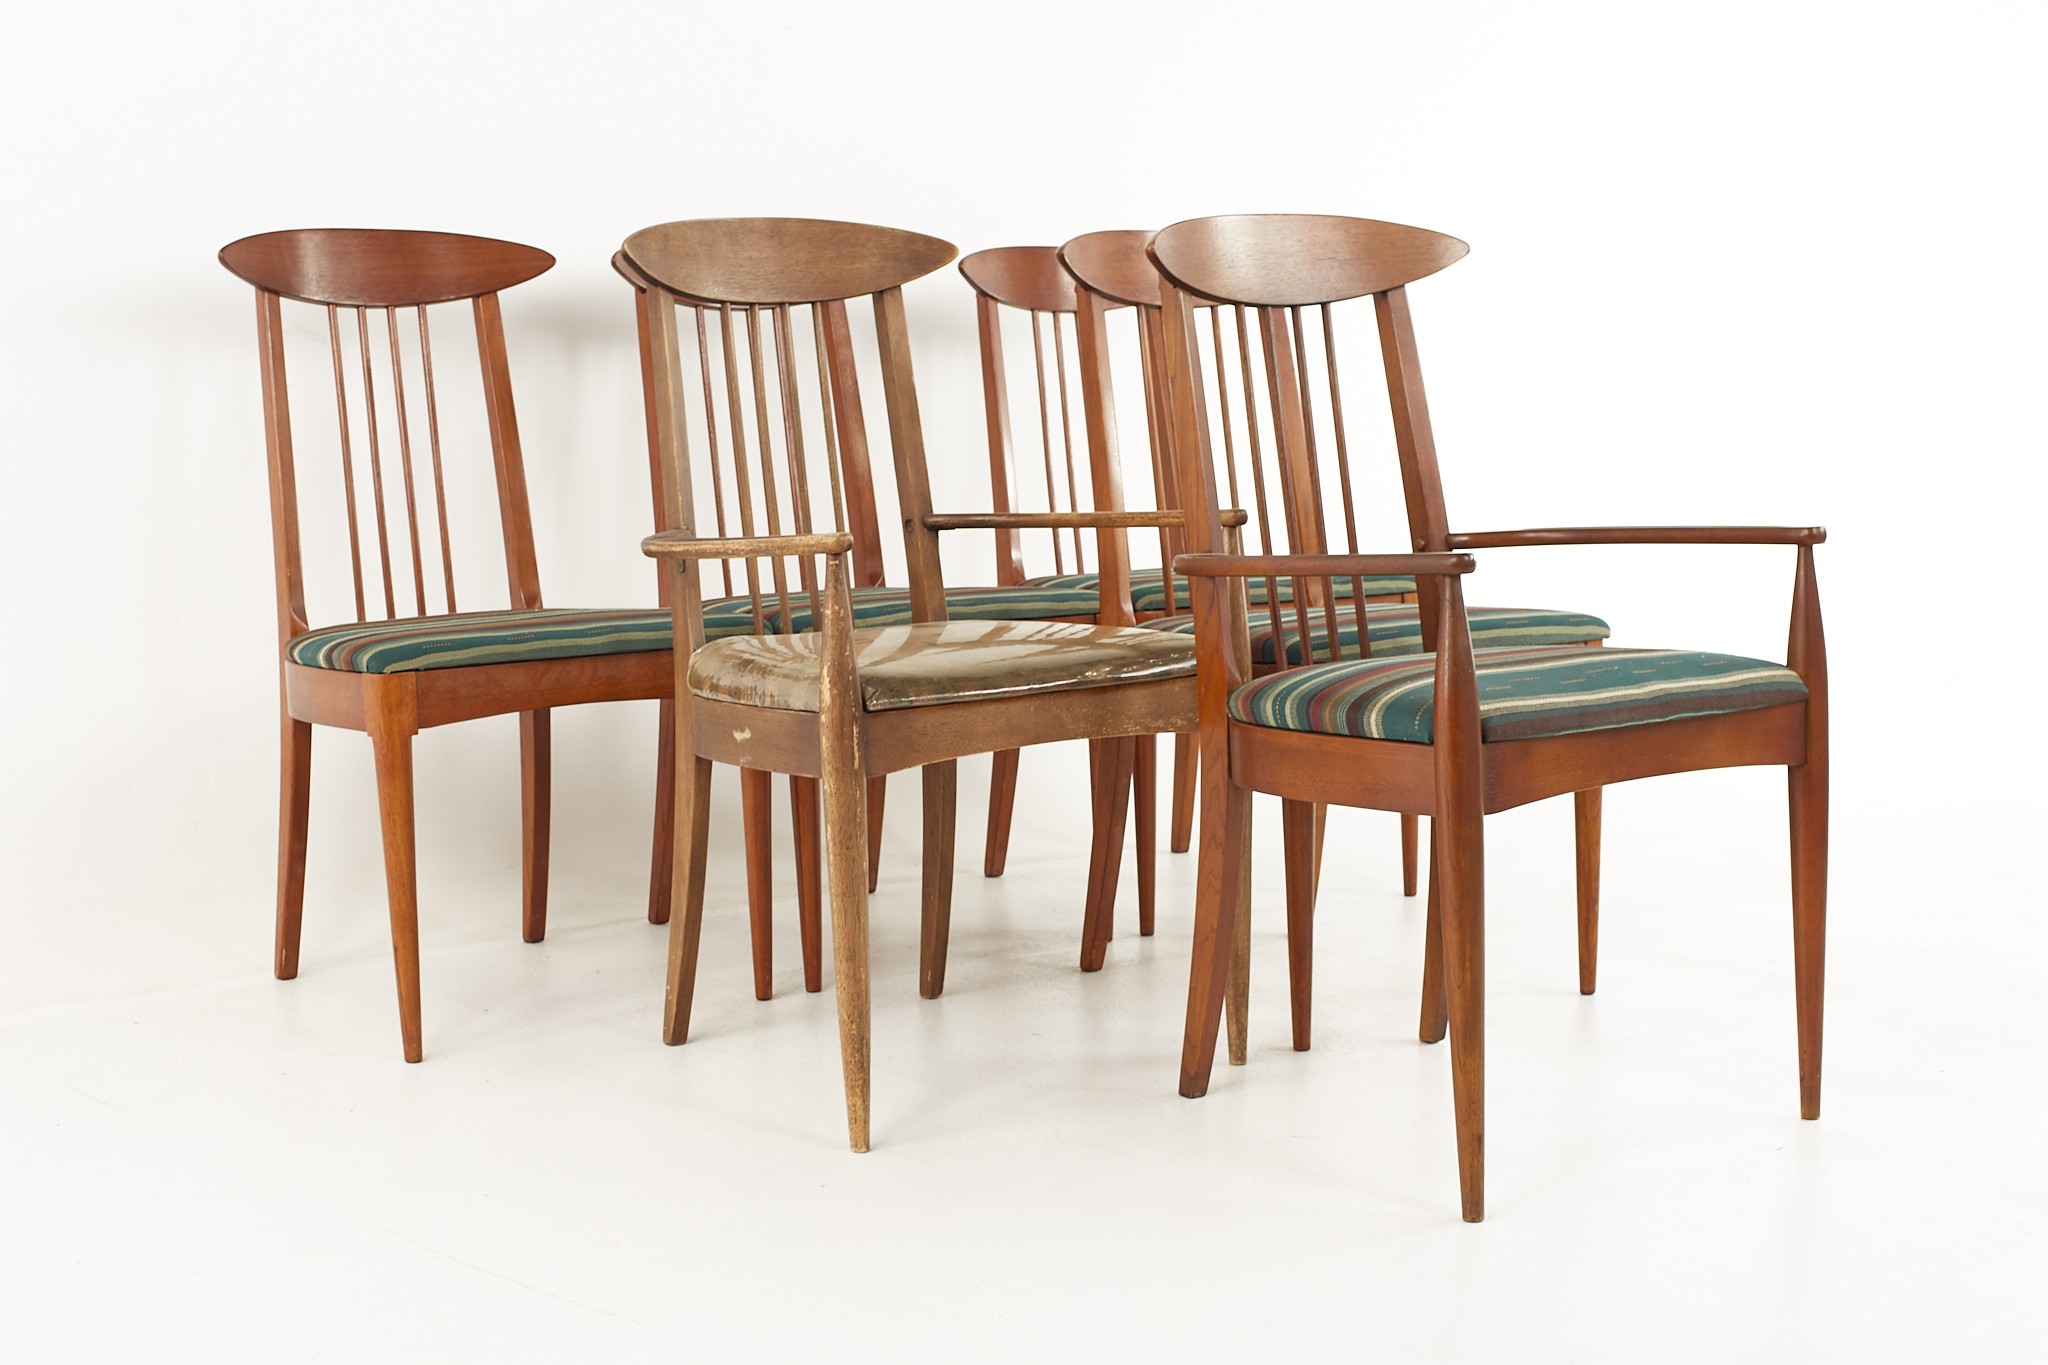 Broyhill Sculptra Brutalist Mid Century Cats Eye Dining Chairs - Set of 6